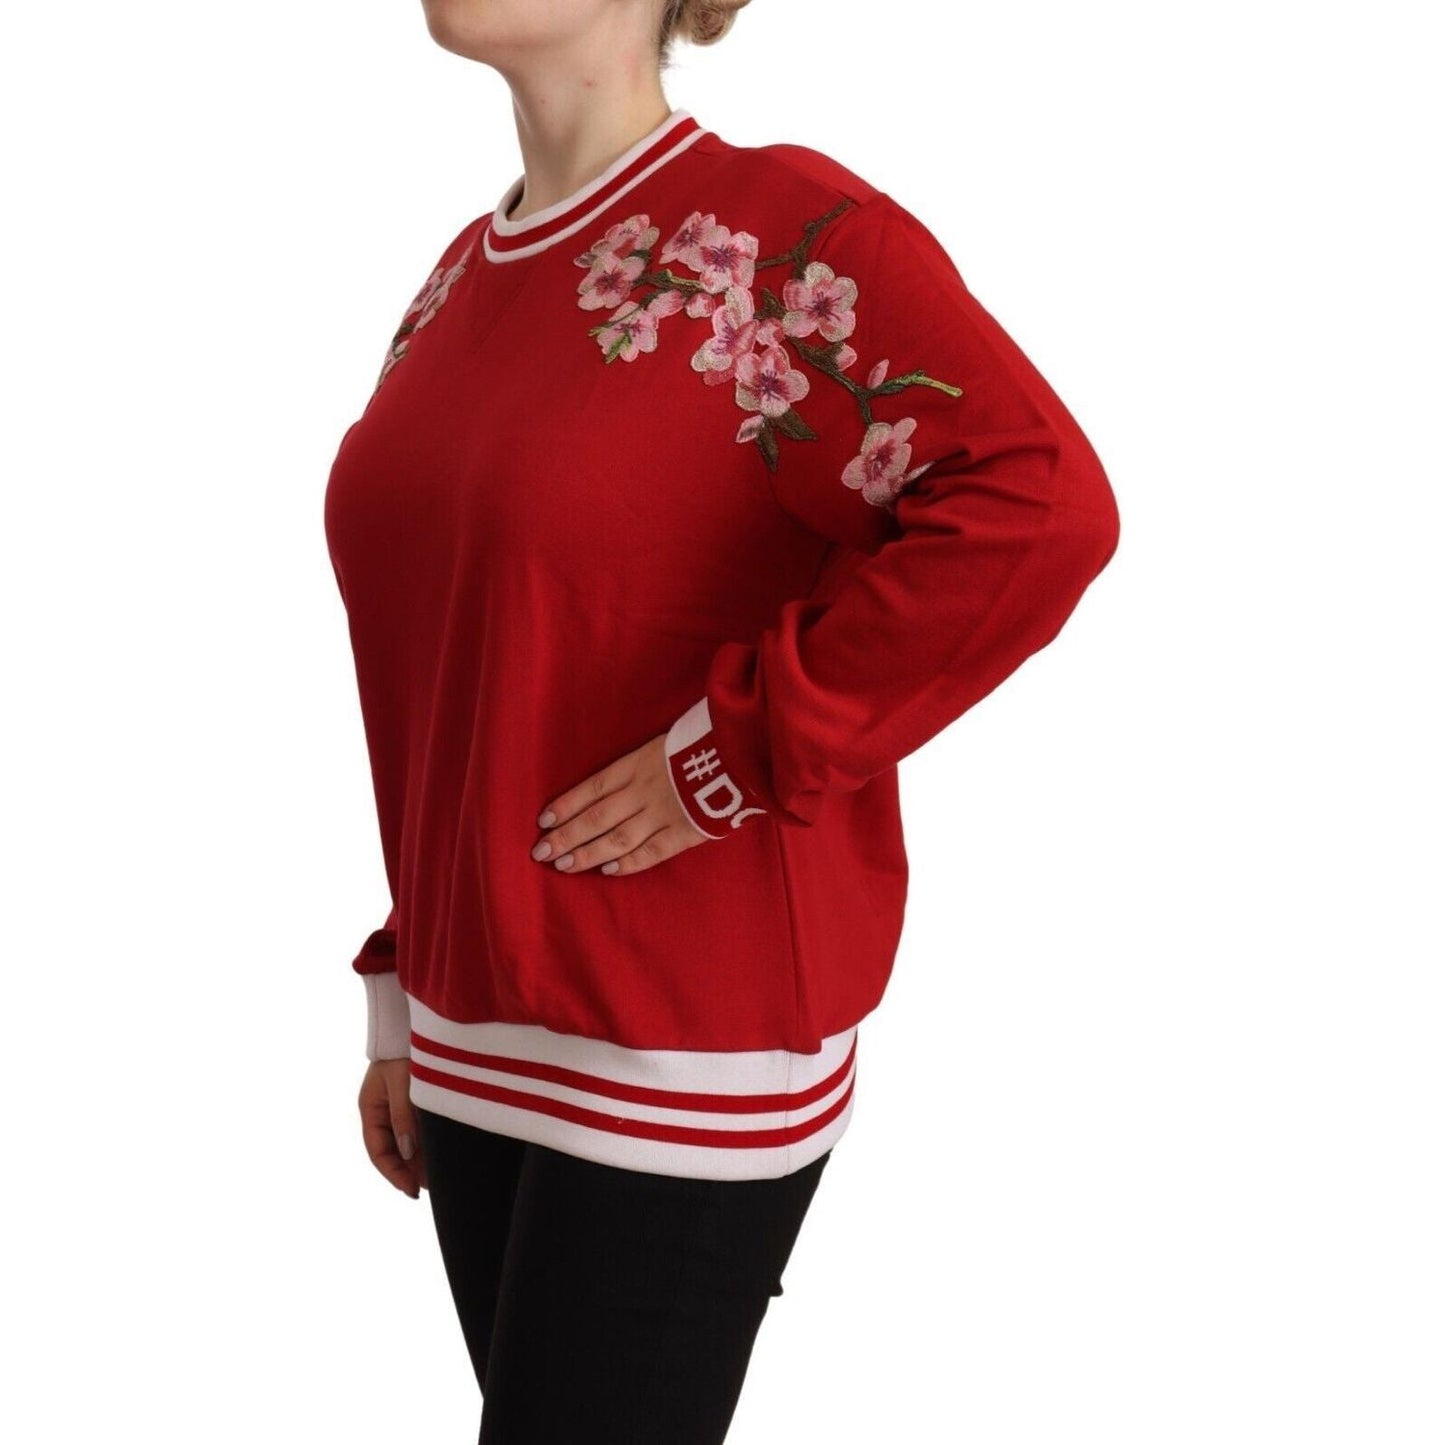 Dolce & Gabbana Elegant Red Crewneck Pullover with Floral Motif WOMAN SWEATERS red-cotton-crewneck-dglove-pullover-sweater s-l1600-1-17-7eaf24c0-e73.jpg